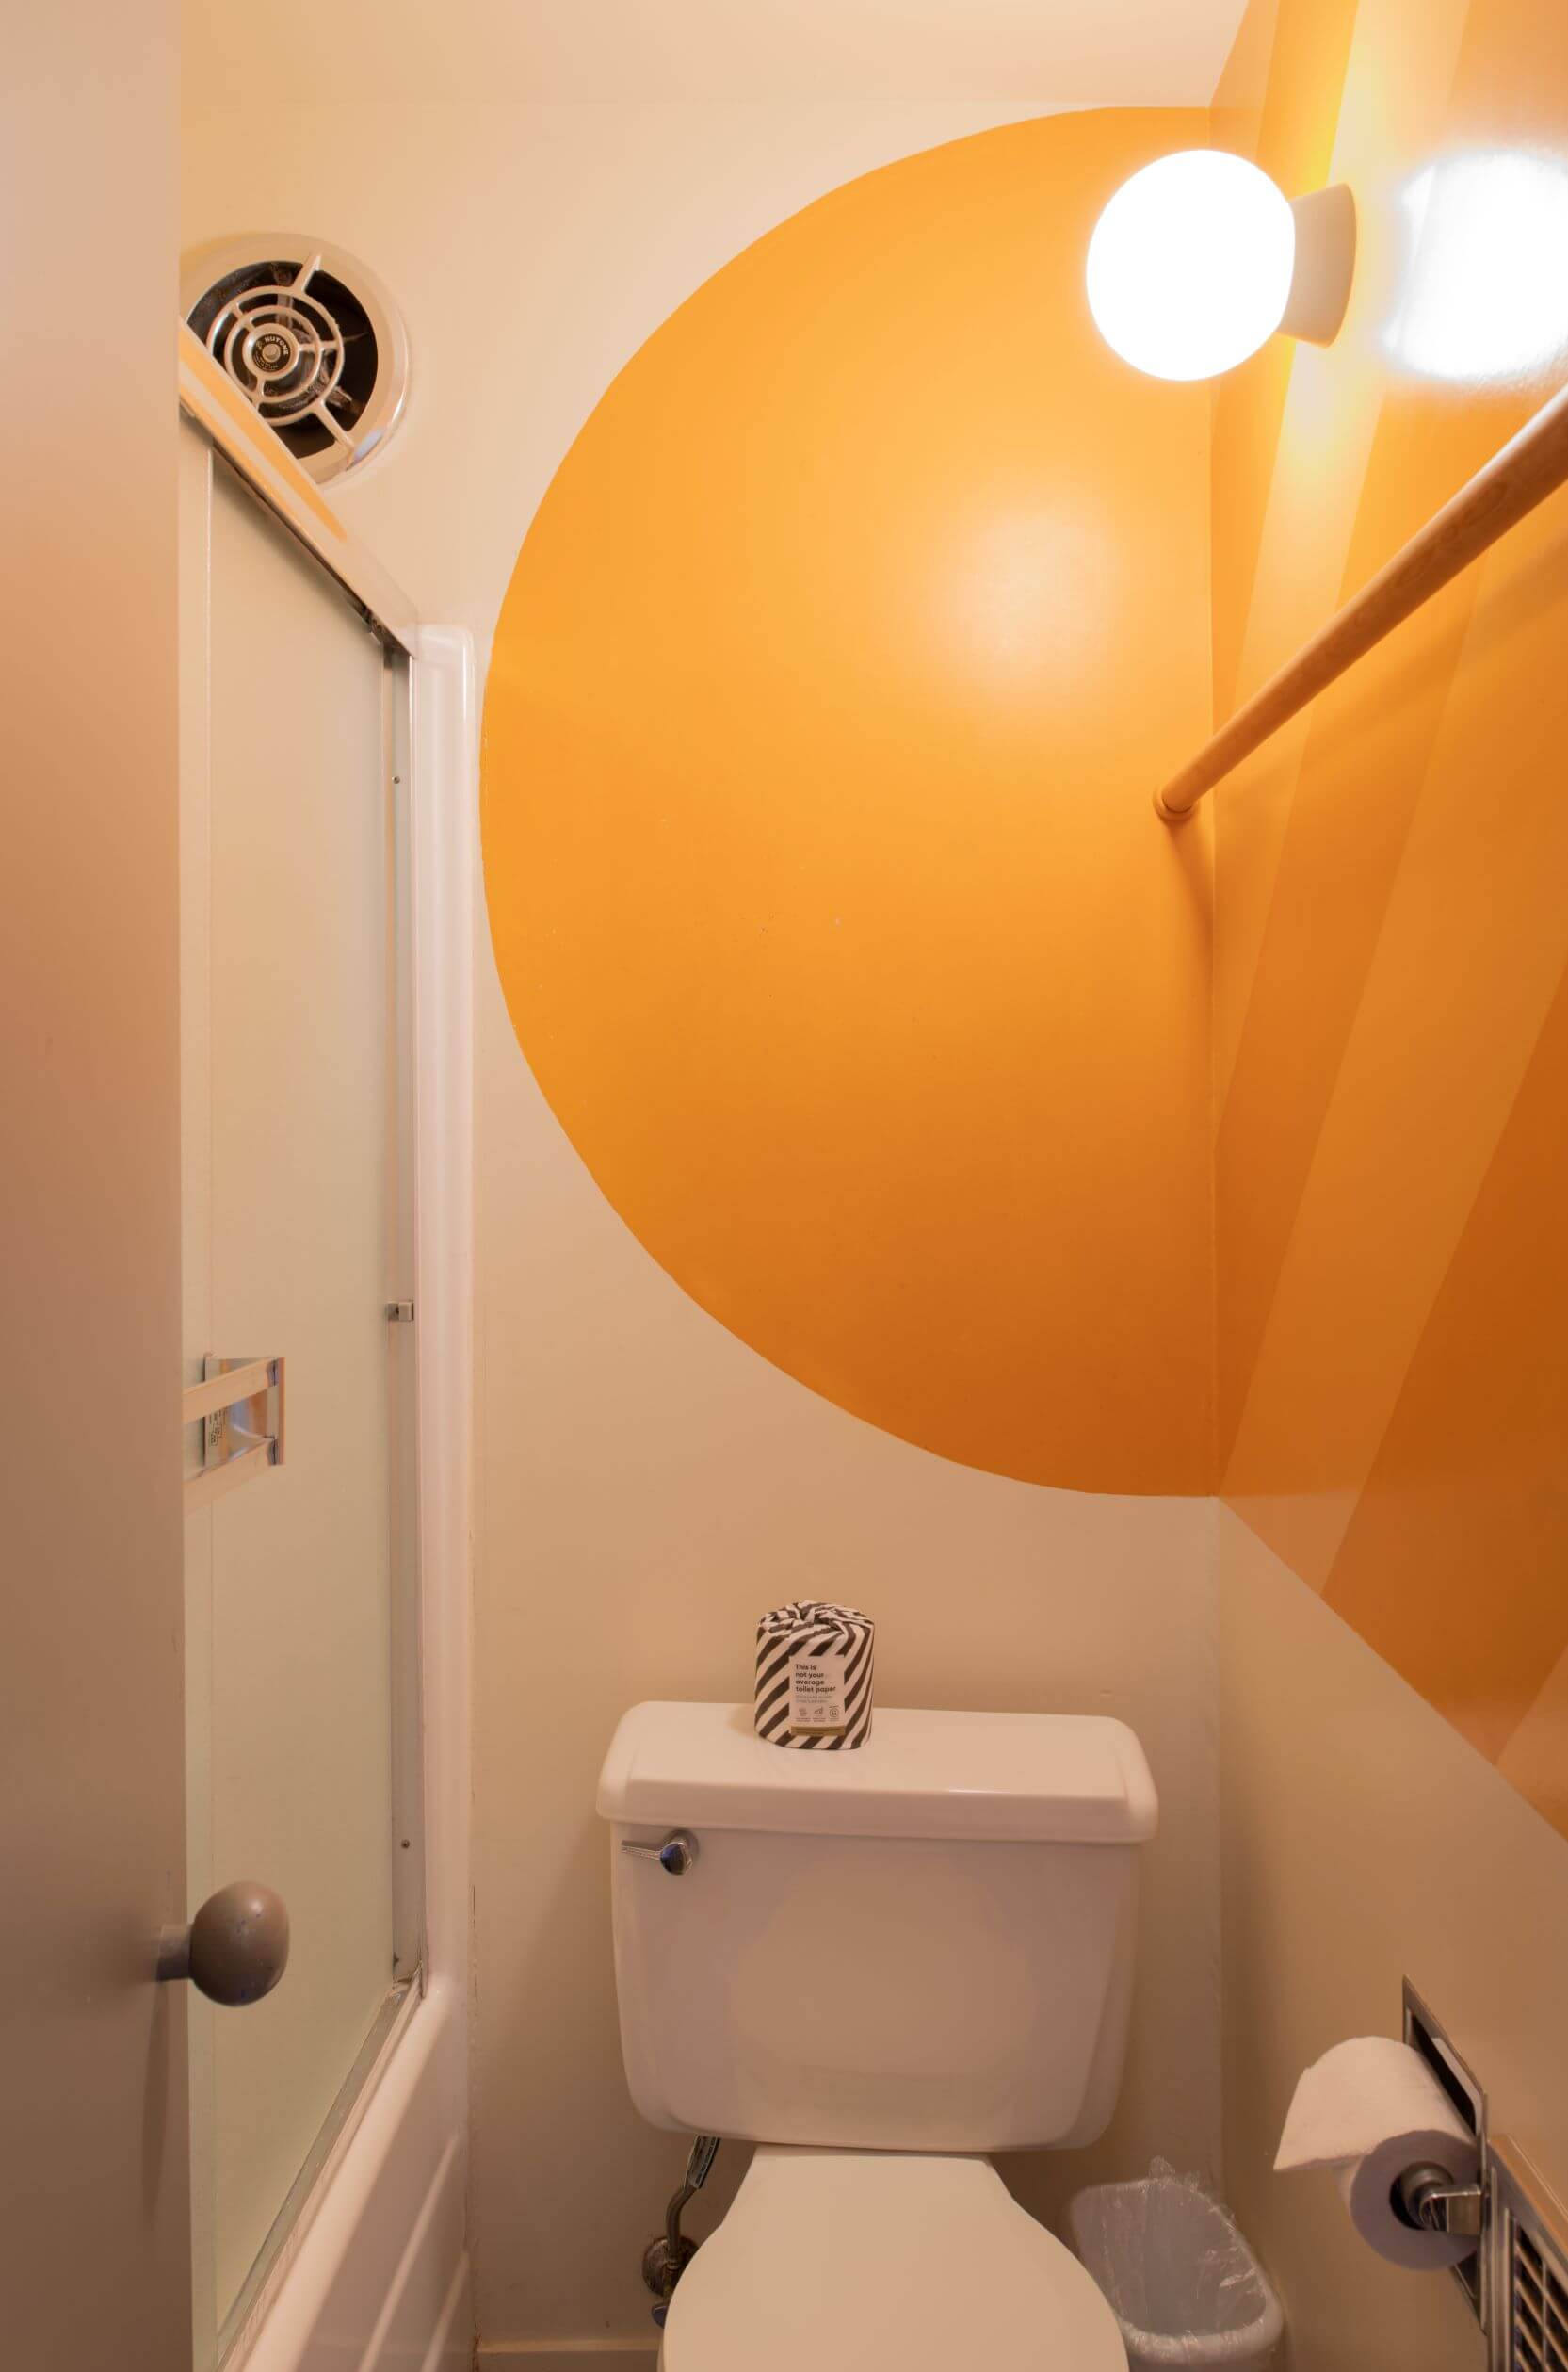 Moore Condo #9 - small bathroom and shower with bright yellow circle painted on wall.